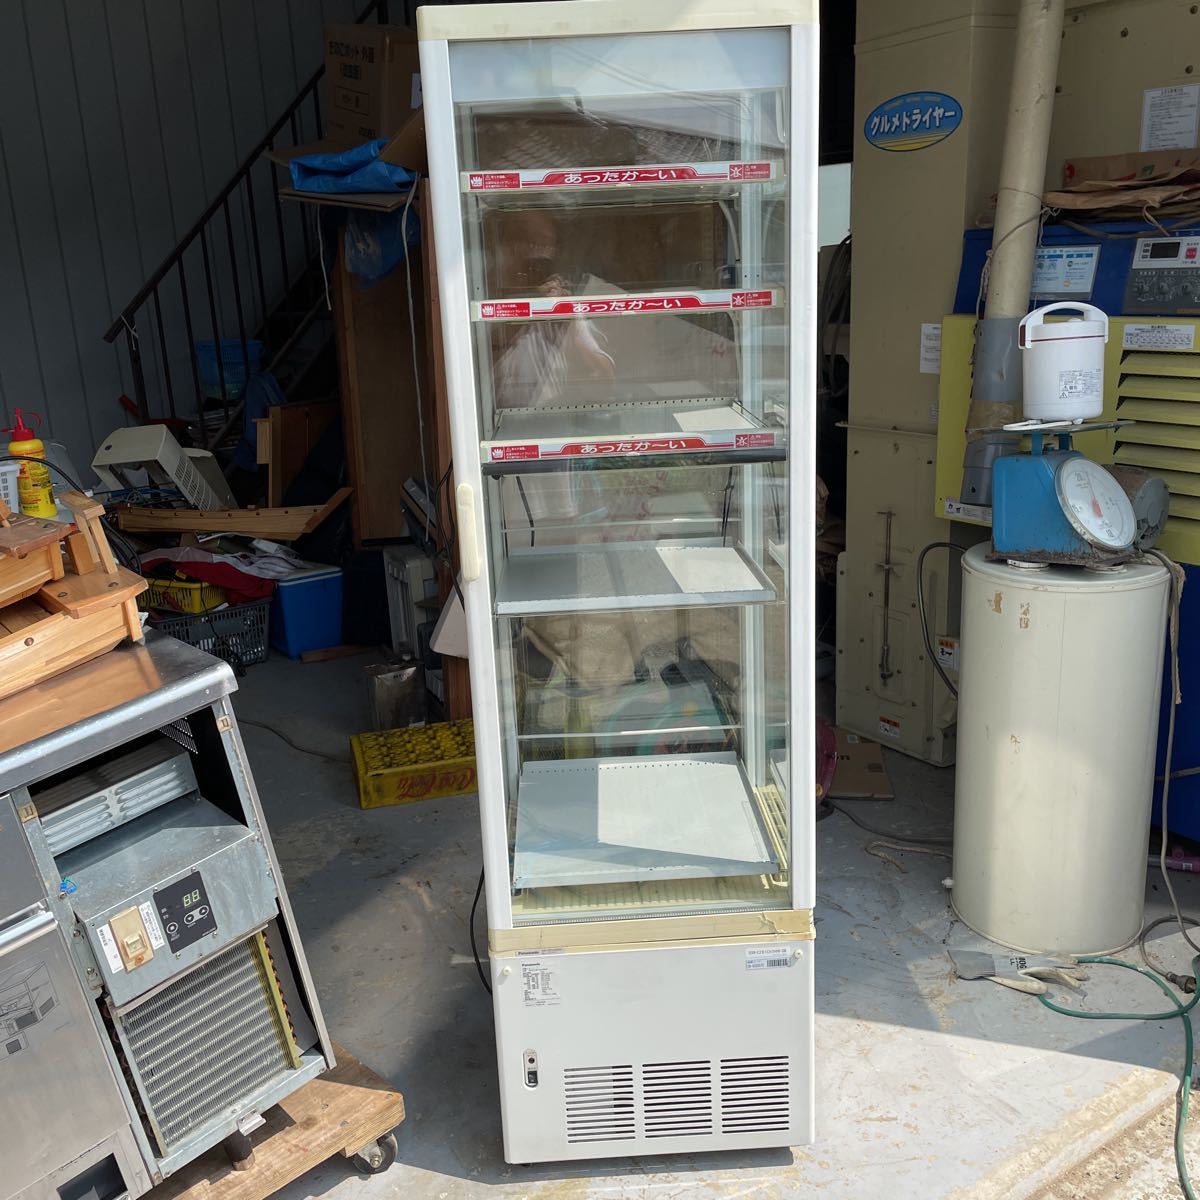  Panasonic business use refrigeration showcase SSR-C281CH3NW 2014 year on 3 step cold temperature switch under from 3 step refrigeration exclusive use total 6 step cold heating 